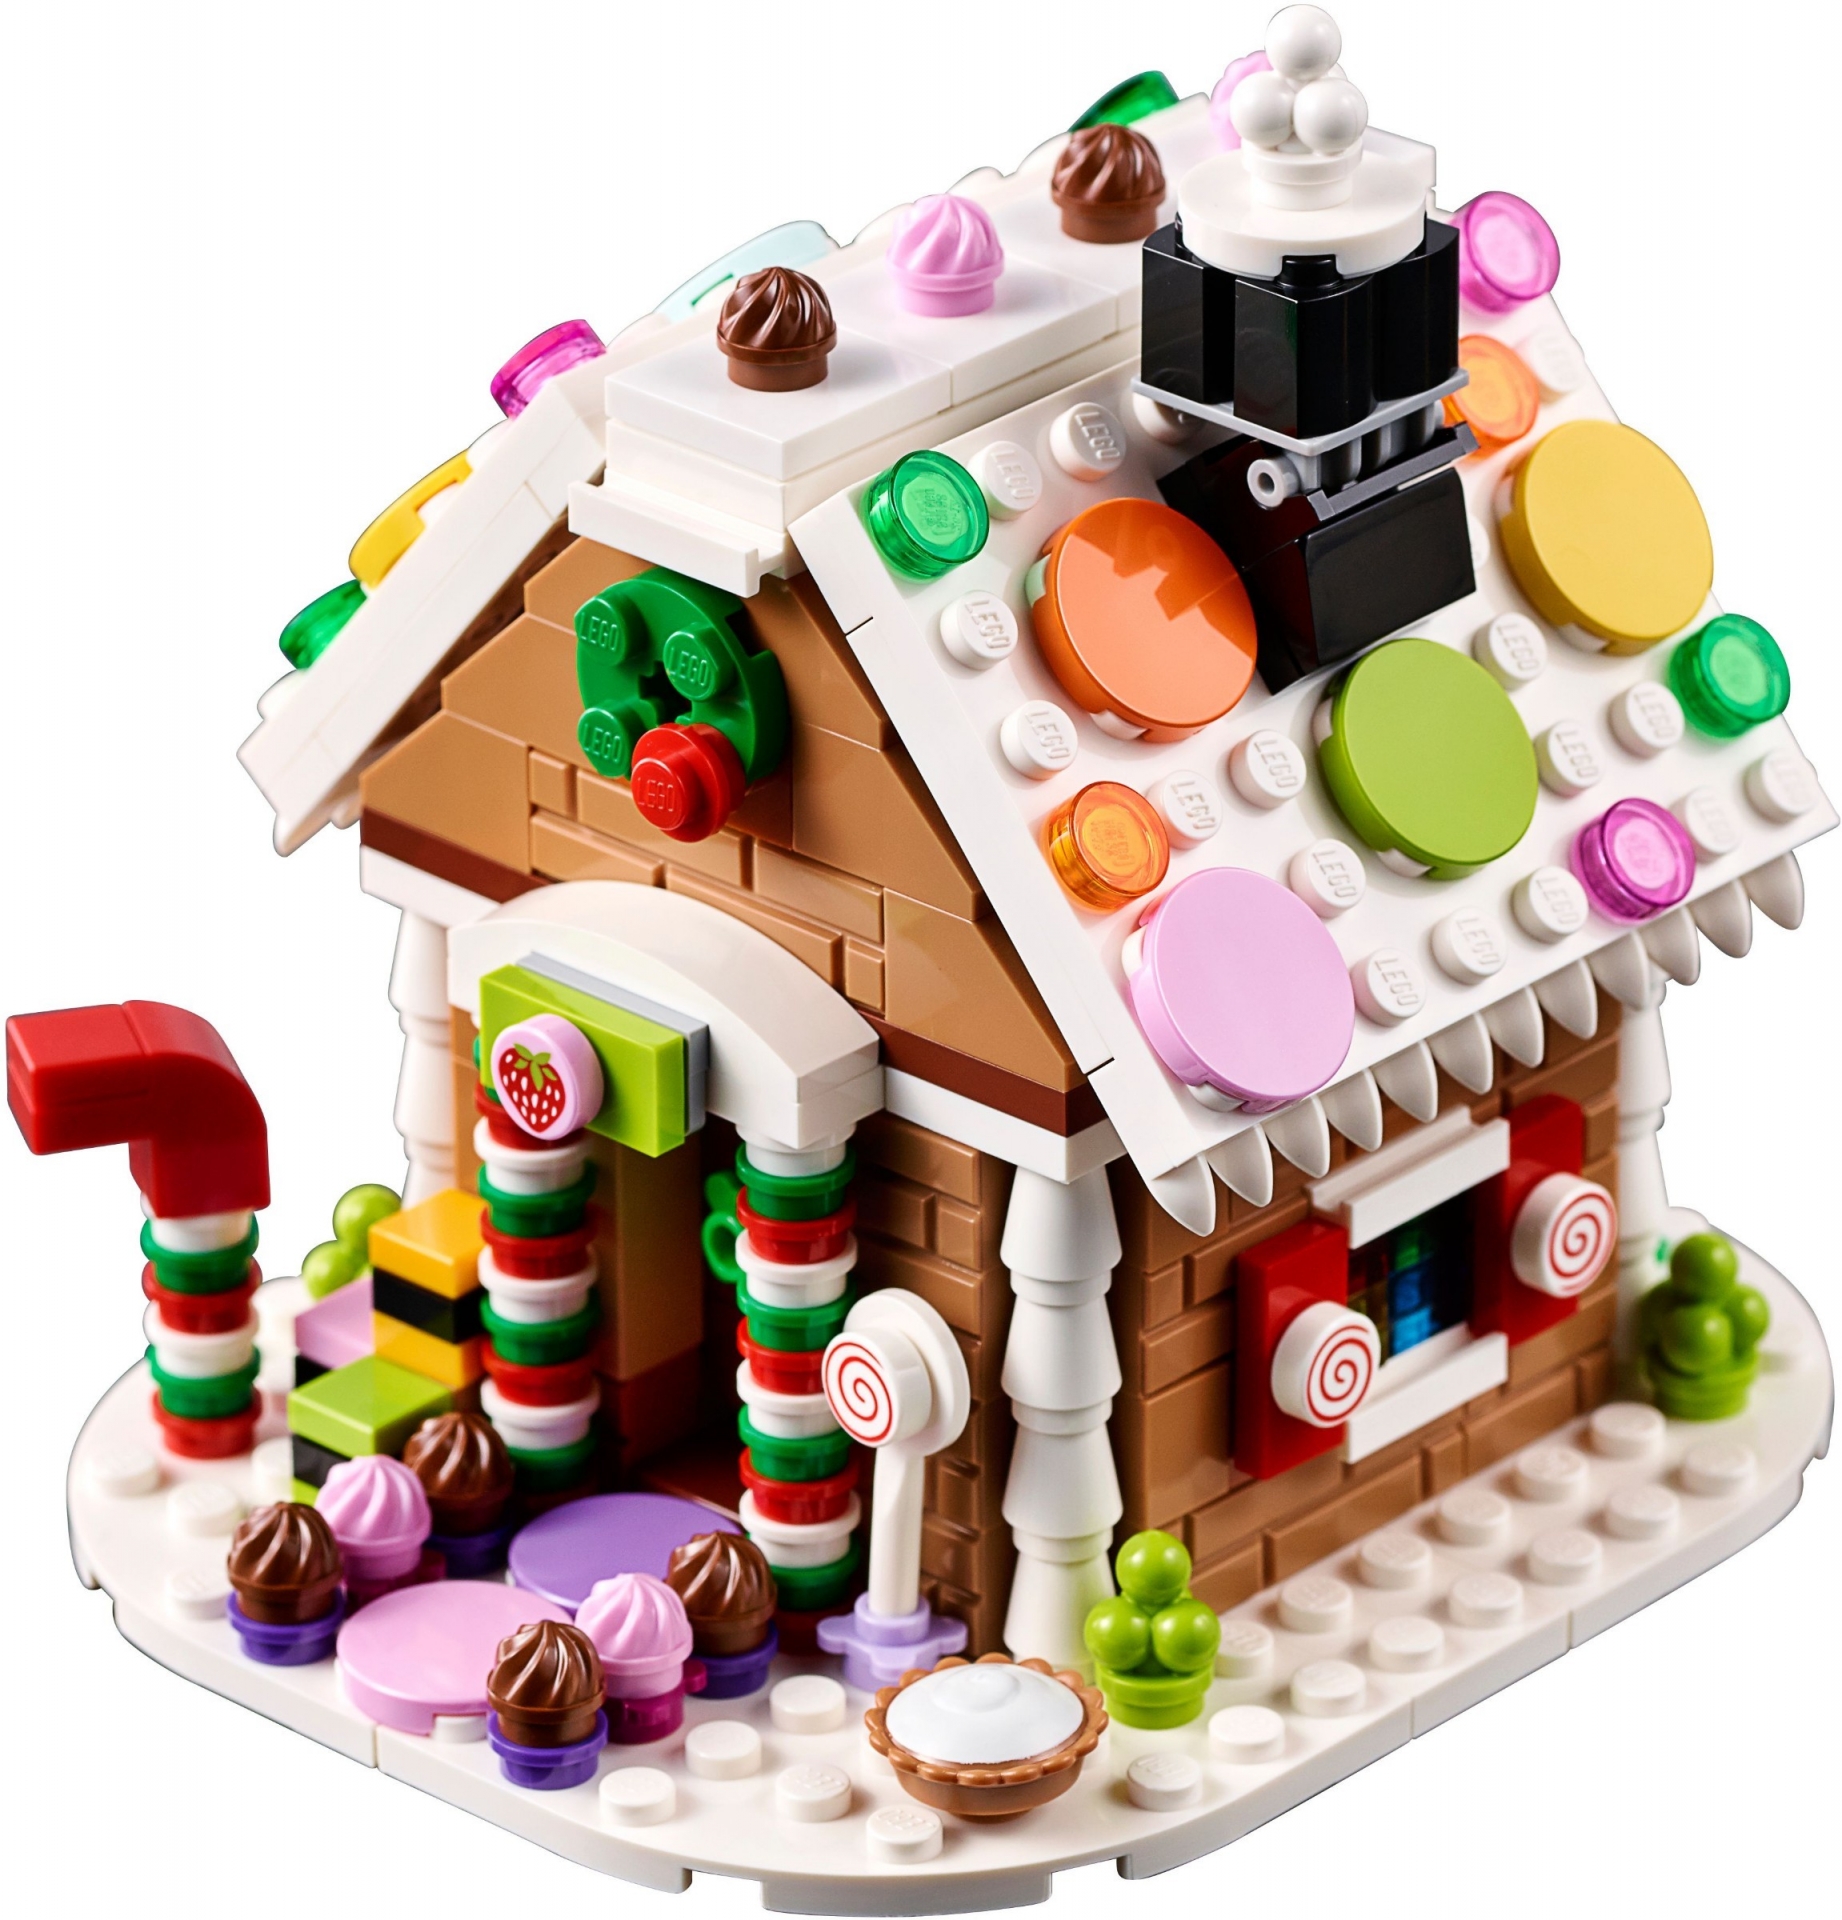 40139 Gingerbread House LEGO instructions and catalogs library